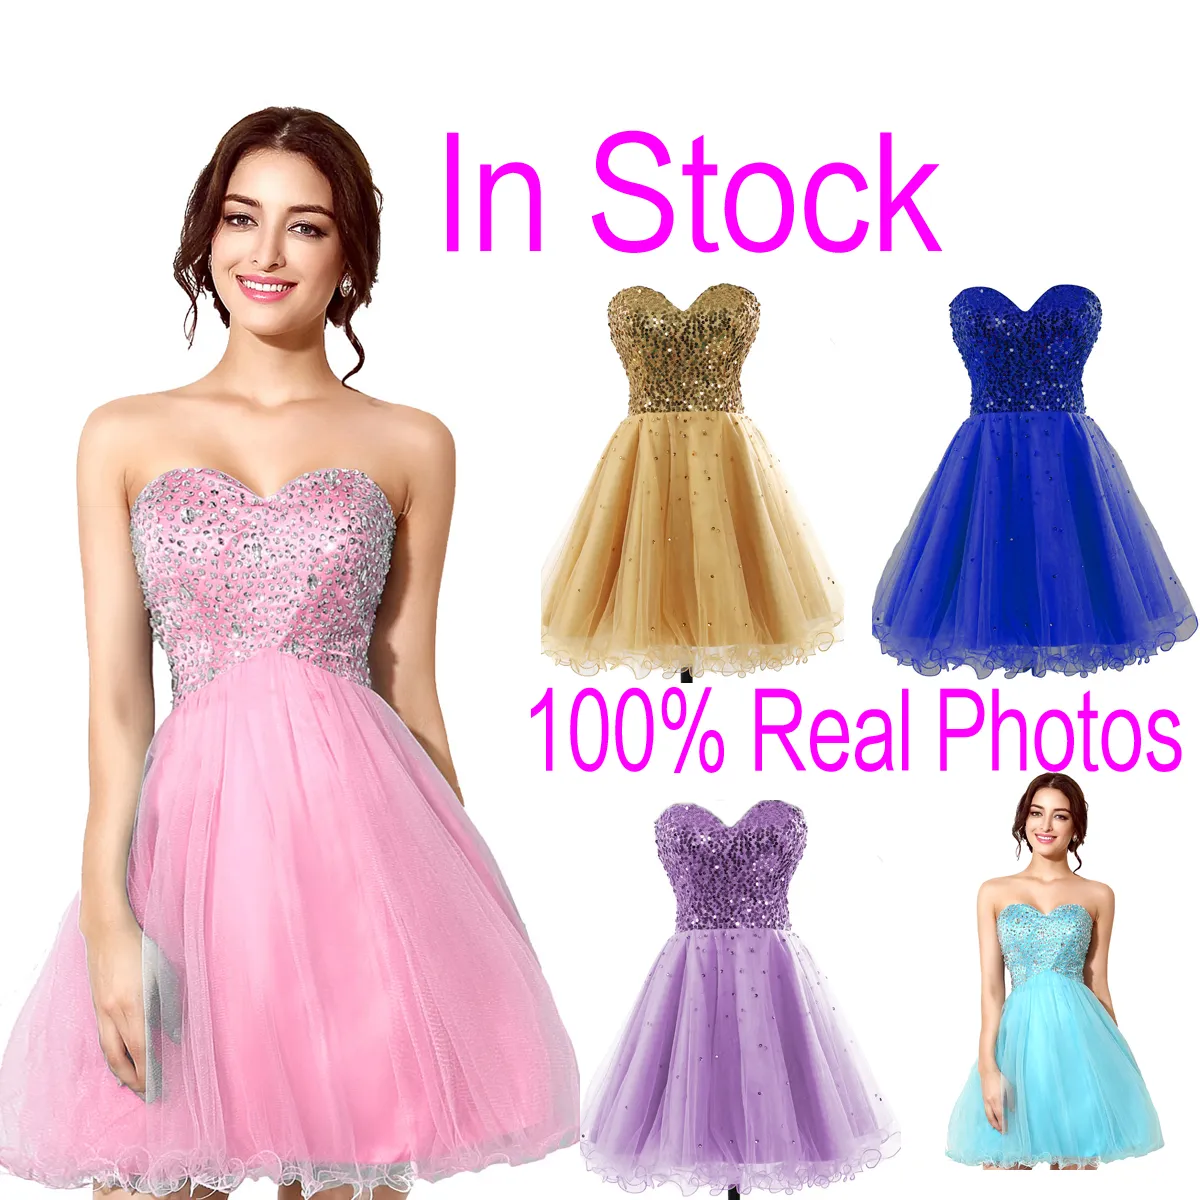 In Stock Pink Tulle Mini Crystal Homecoming Dresses Beads Lilac Sky Royal Blue Short Prom Party Graduation Gowns 2019 Cheap Real Image Hot